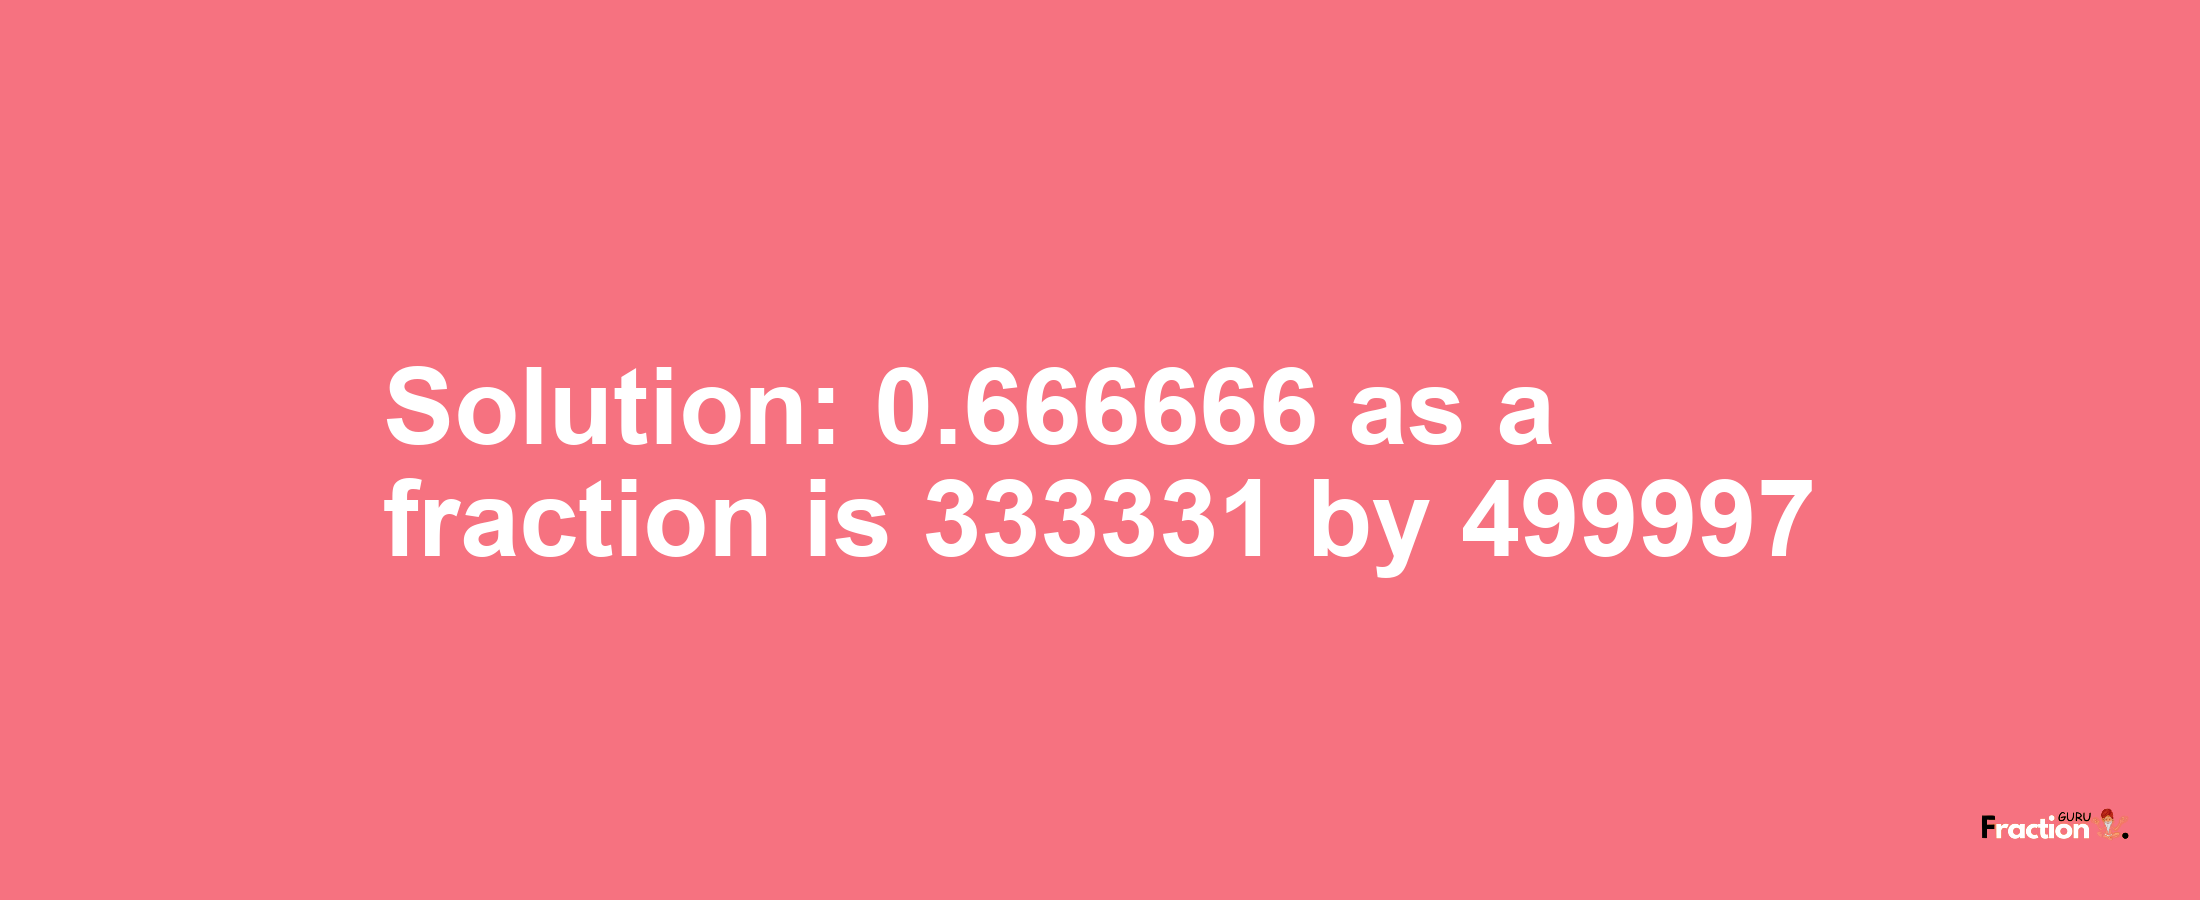 Solution:0.666666 as a fraction is 333331/499997